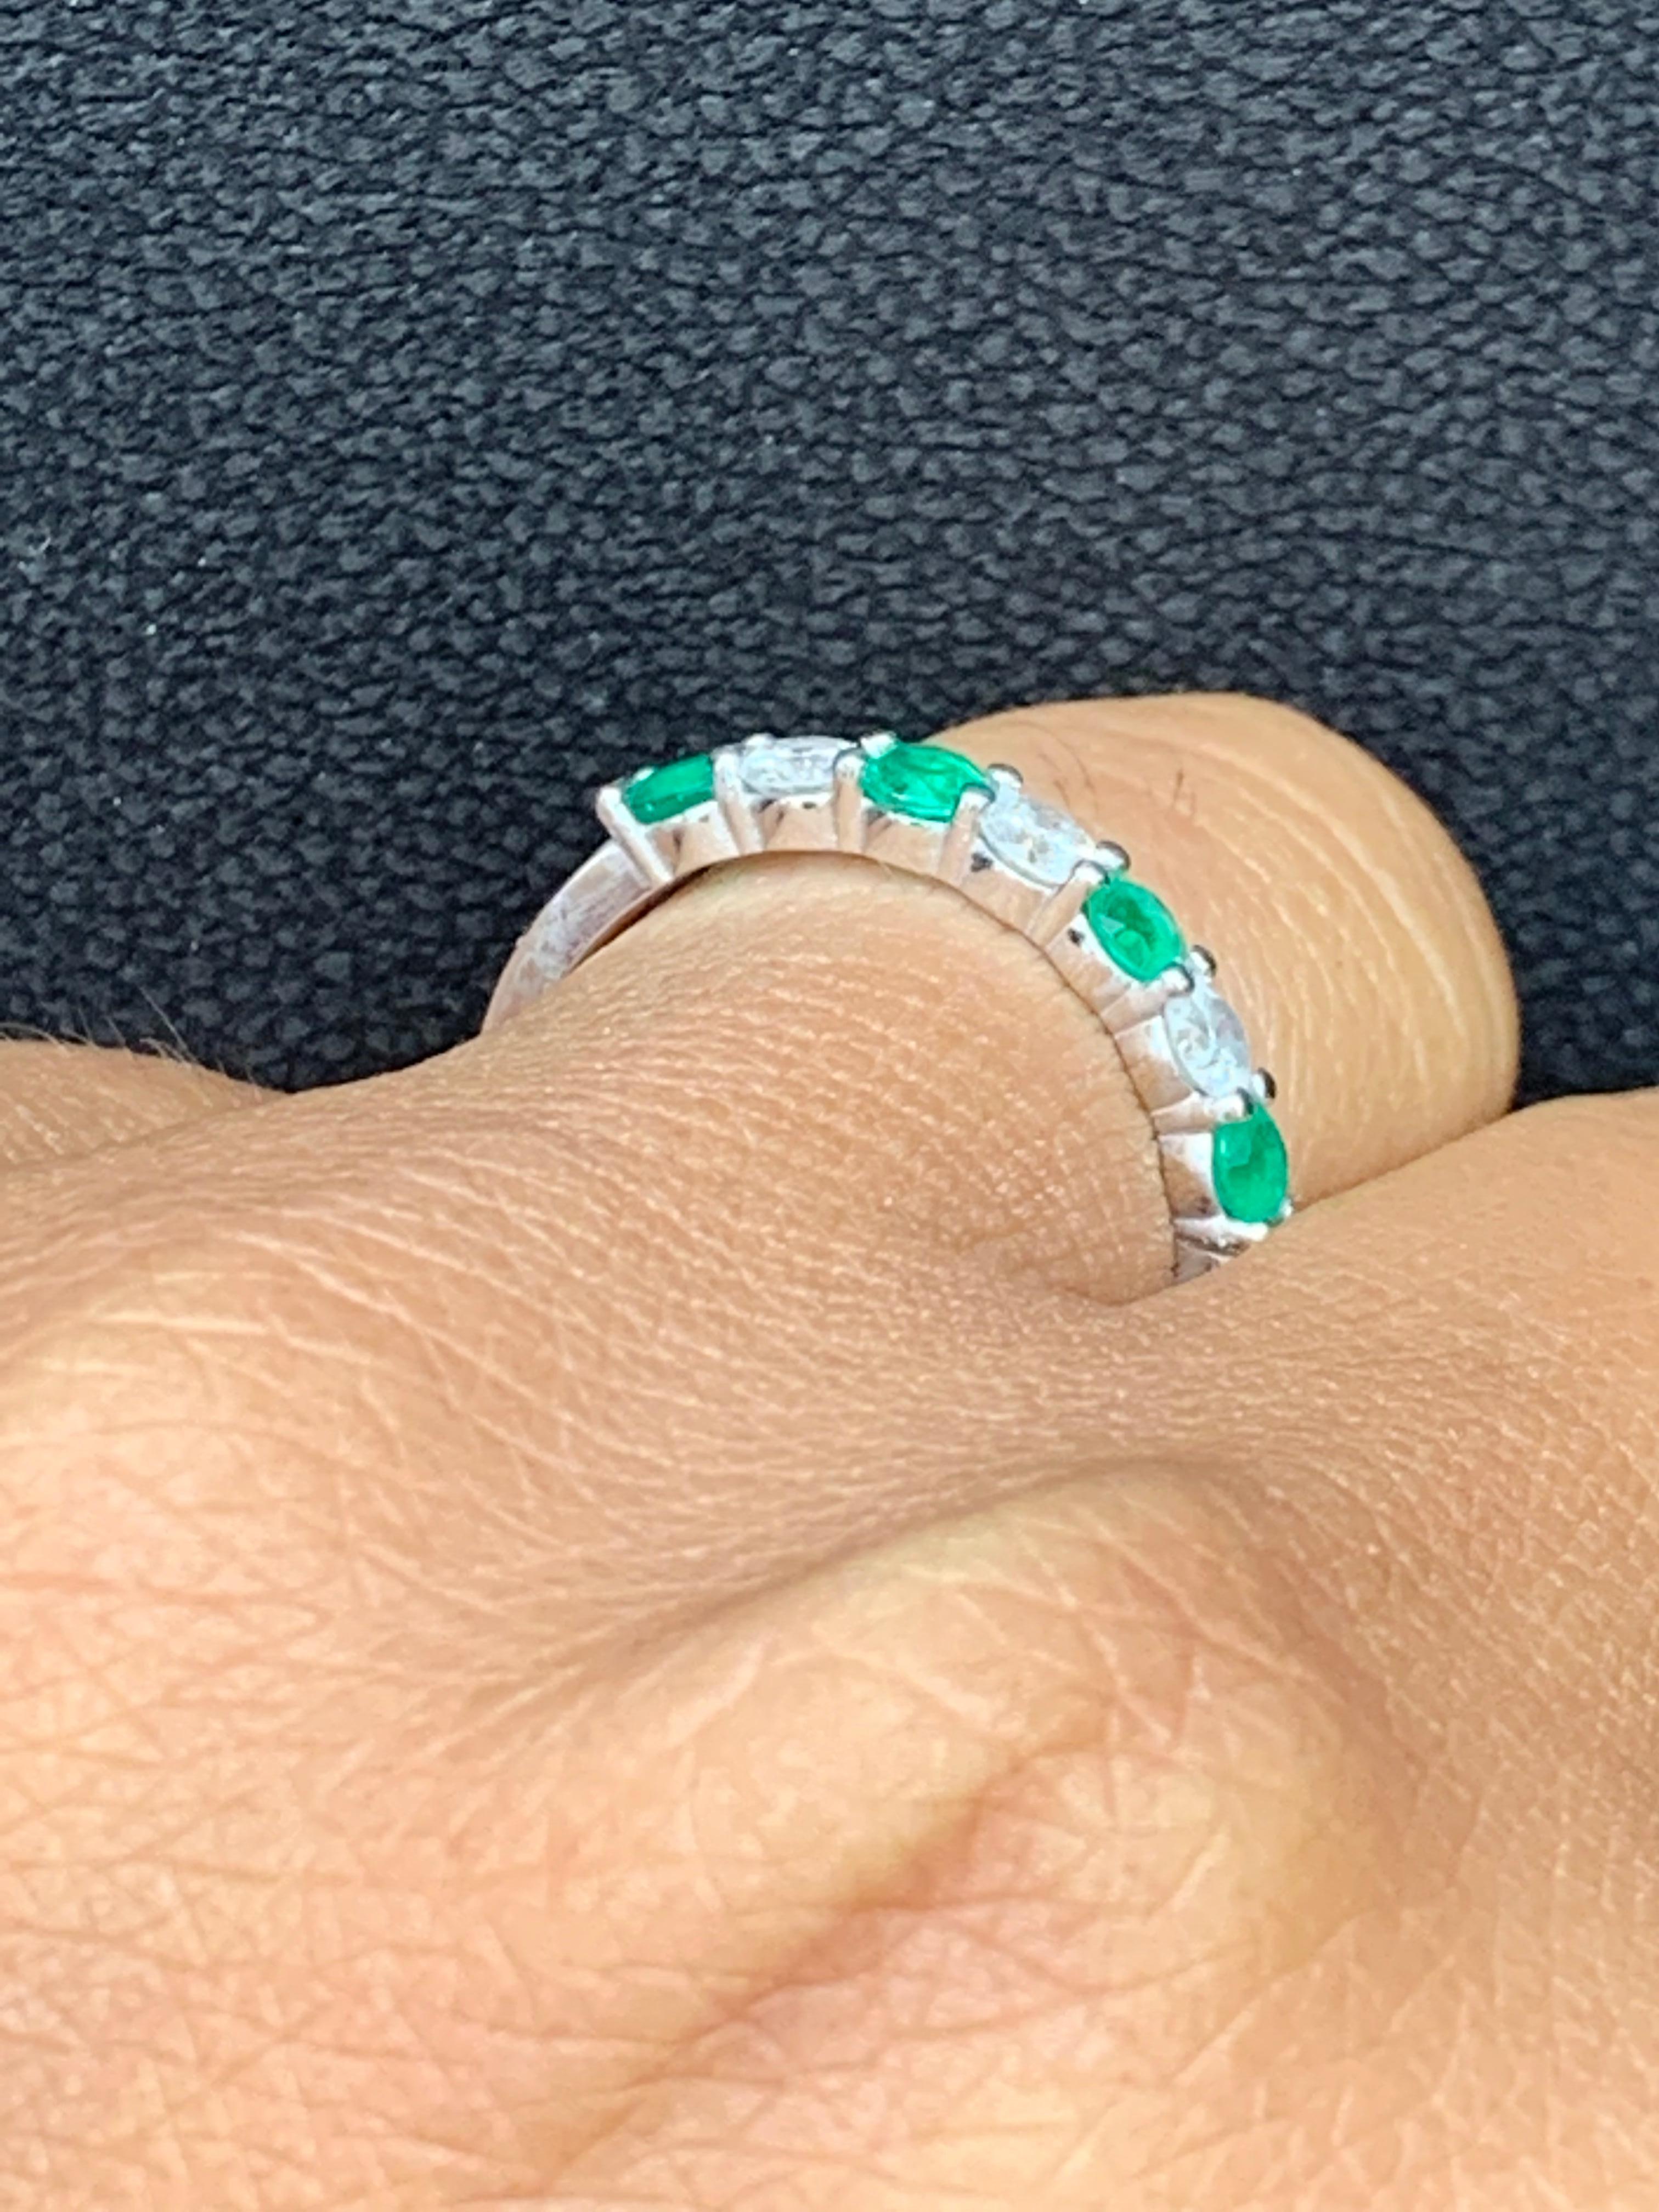 A fashionable and classic wedding band showcasing 4 color-rich green emeralds weighing 0.43 carats total that alternate with 3 brilliant round diamonds weighing 0.37 carats total. Stones secured with a shared prong setting made with 14 karats white